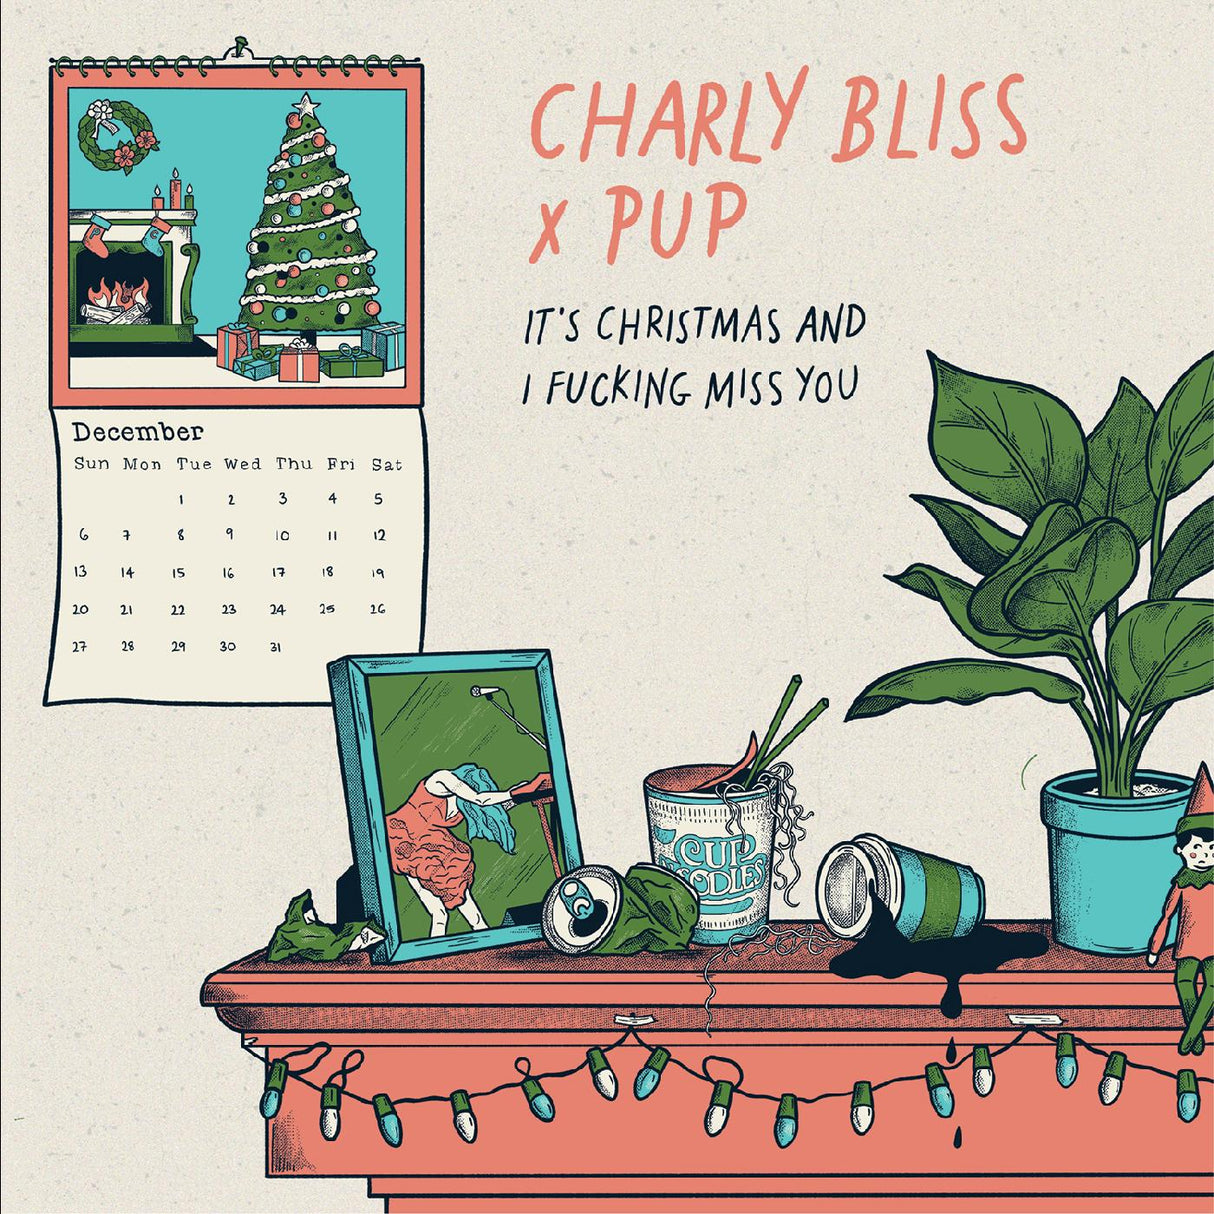 It's Christmas and I Fucking Miss You (featuring PUP) (BLUE VINYL) [Vinyl]